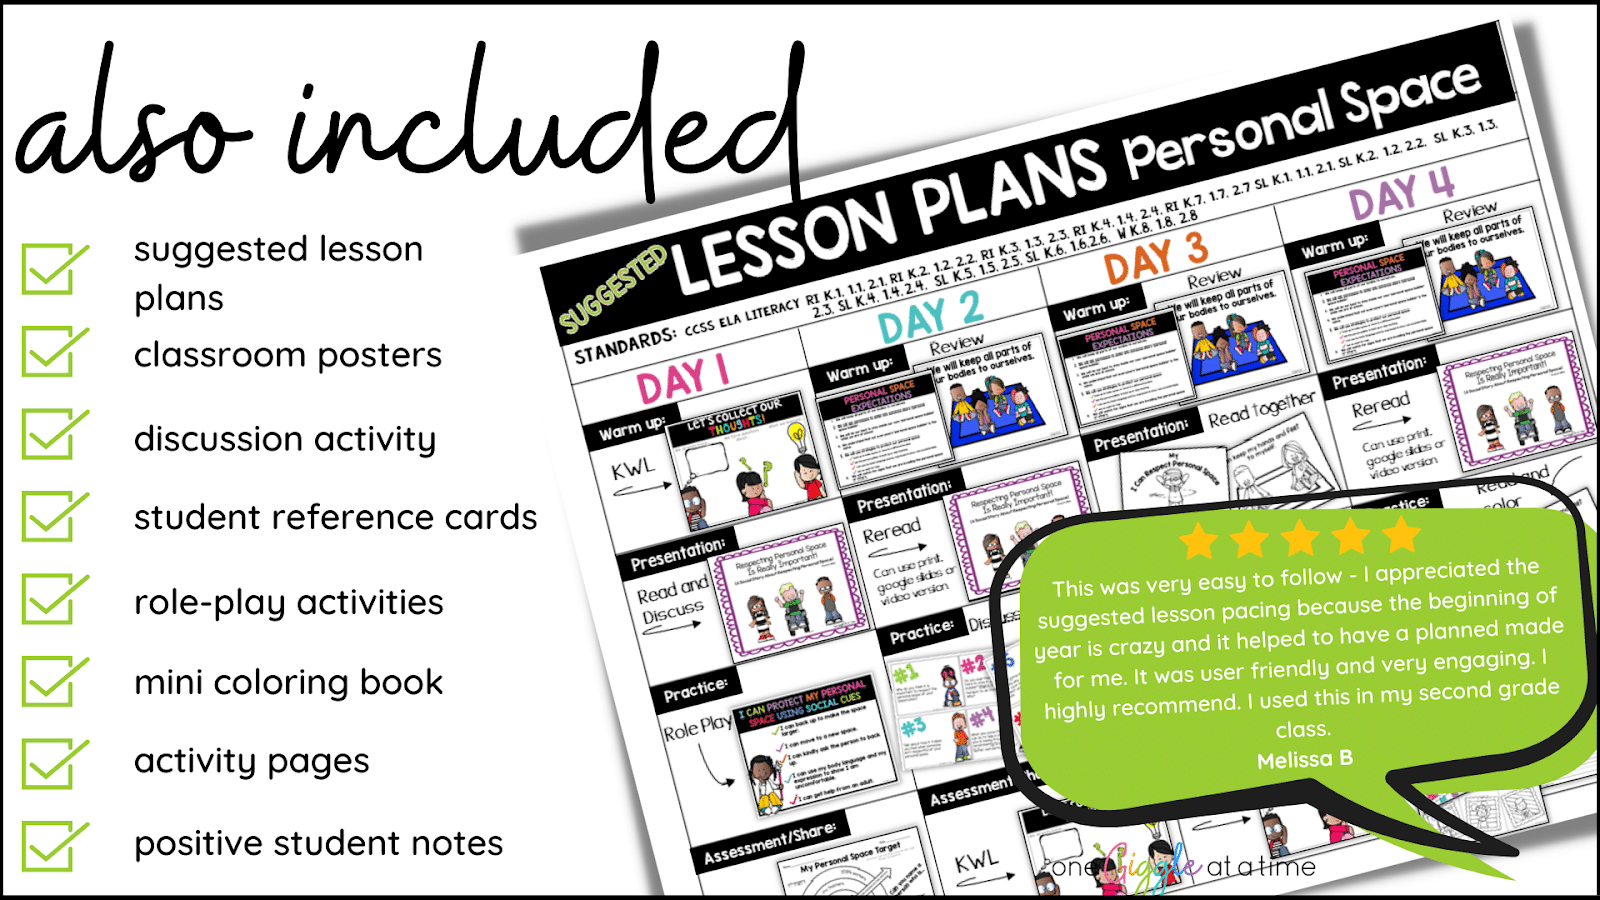 teaching-personal-space-resource